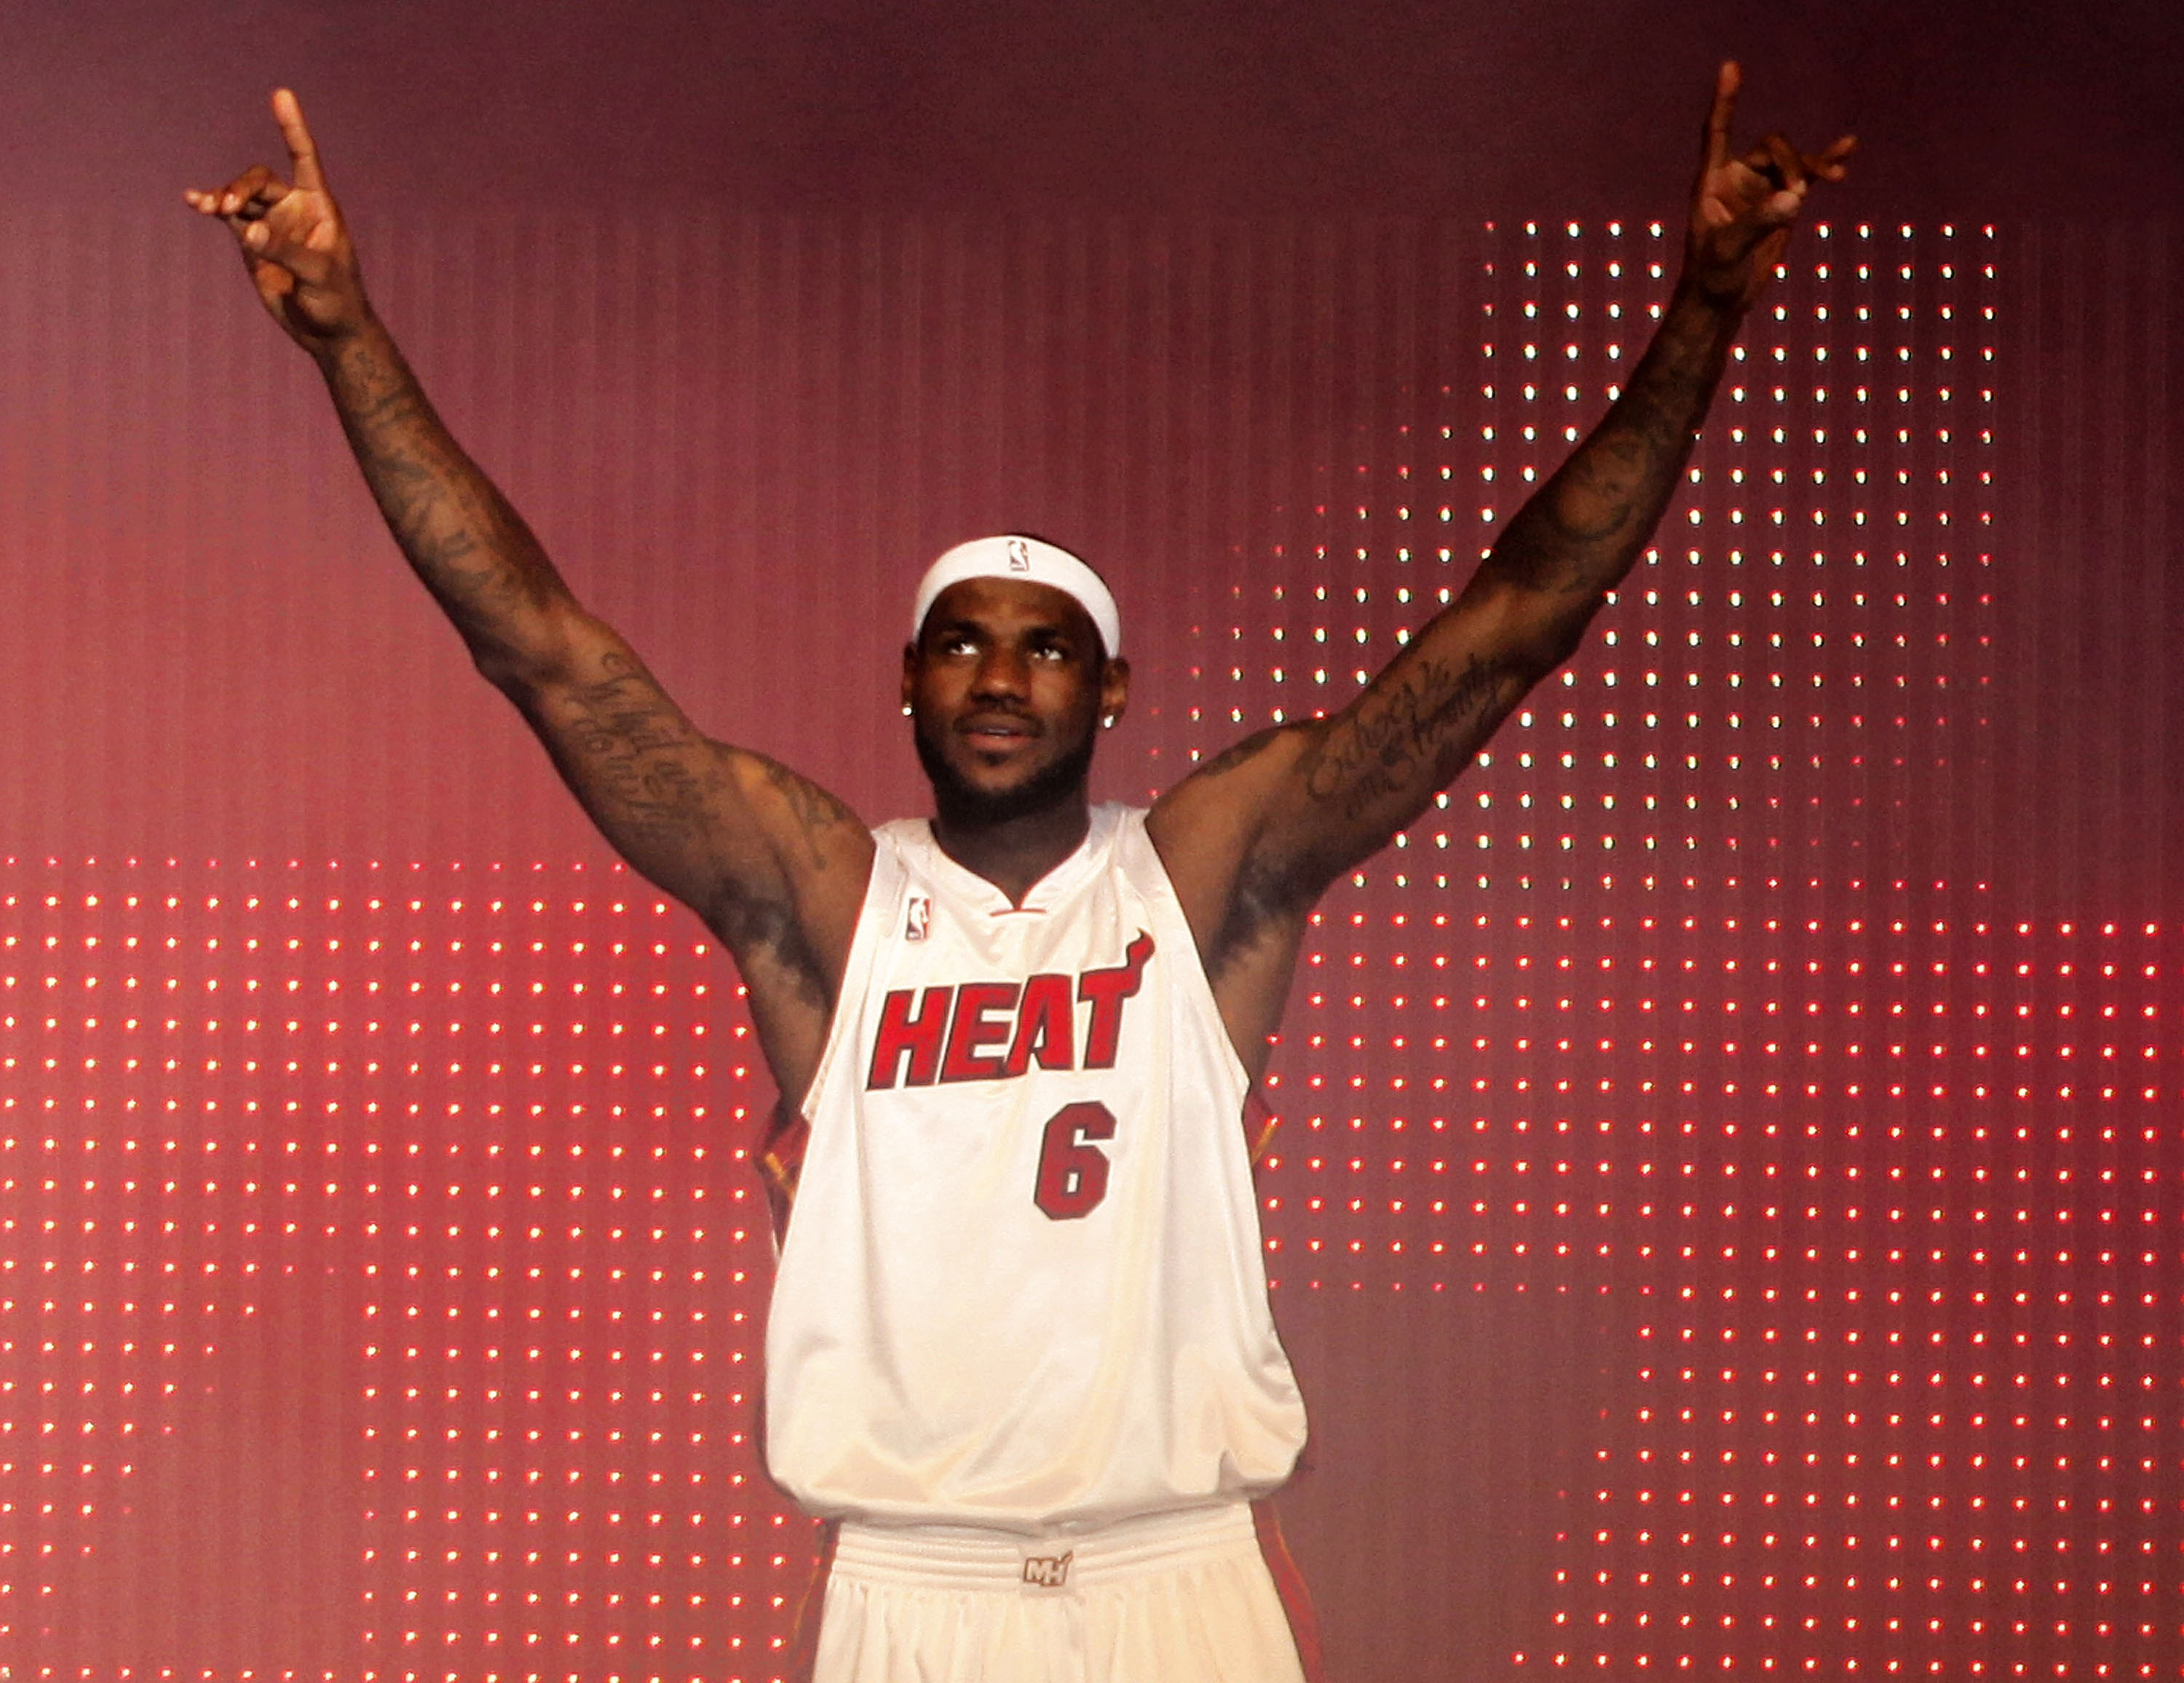 MIAMI - JULY 09:  LeBron James #6 of the Miami Heat is introduced during a welcome party at American Airlines Arena on July 9, 2010 in Miami, Florida.  (Photo by Marc Serota/Getty Images)